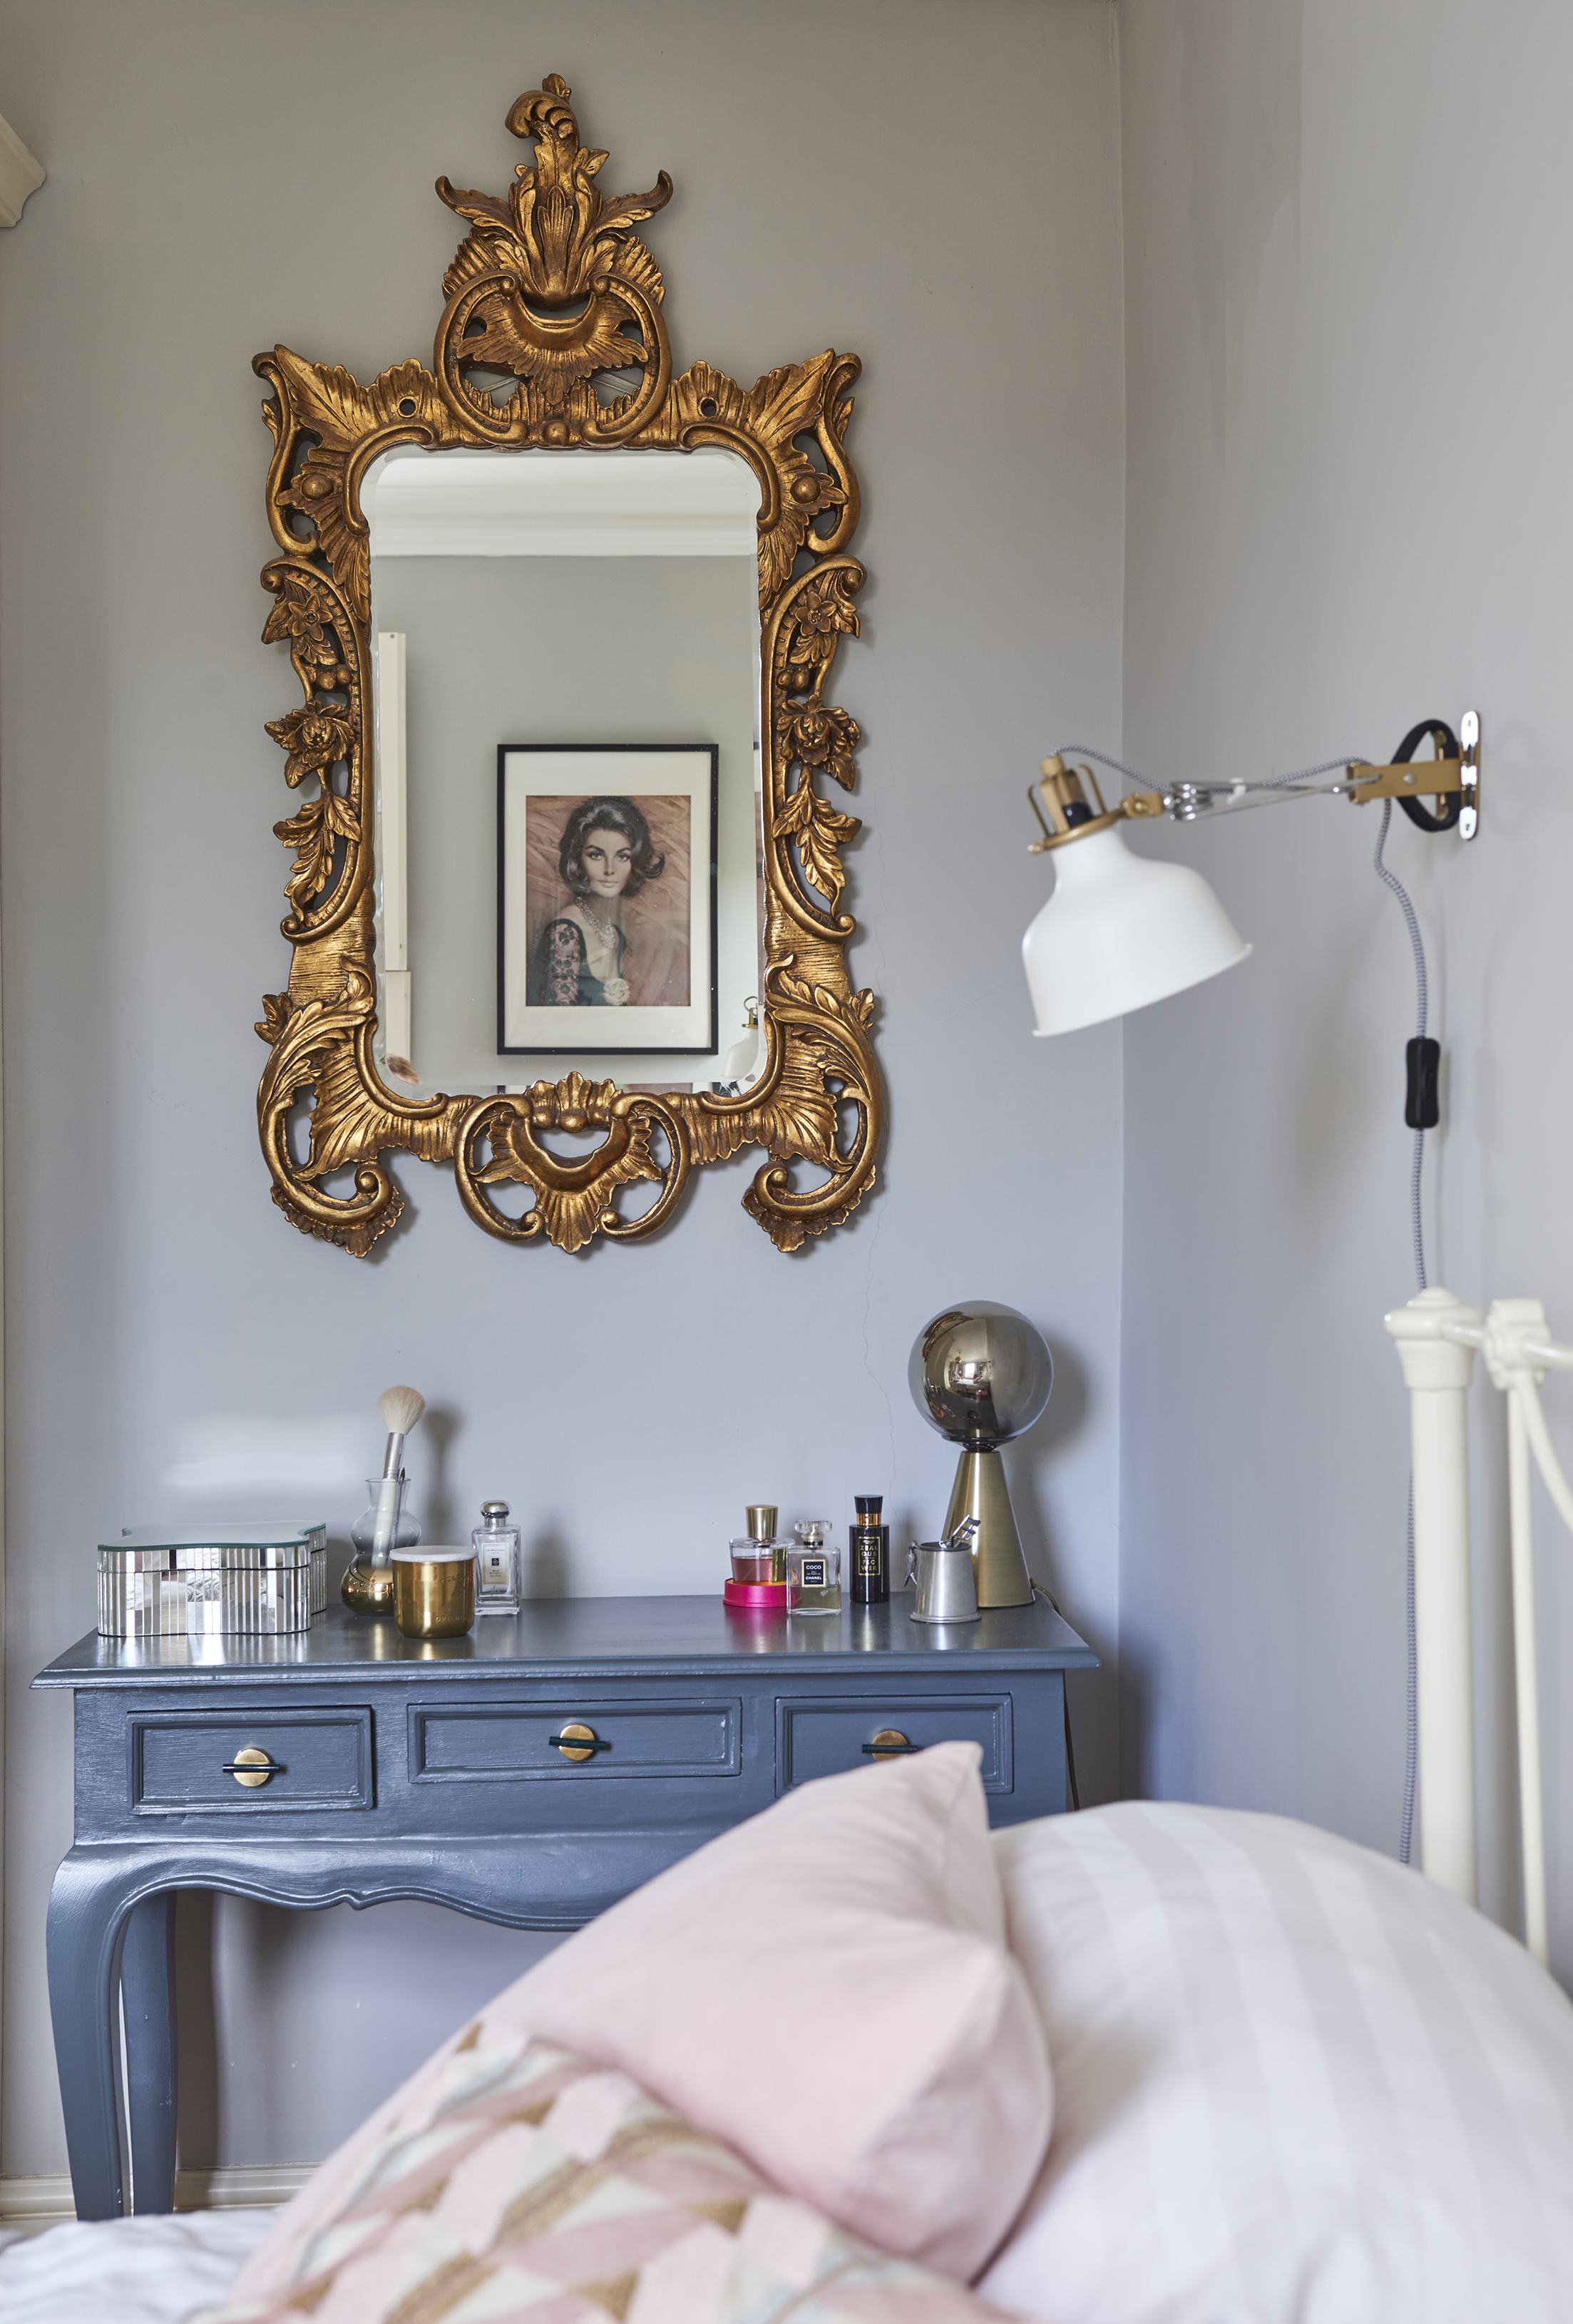 An upcycled old dressing table with Farrow & Ball's Down Pipe paint in bedroom